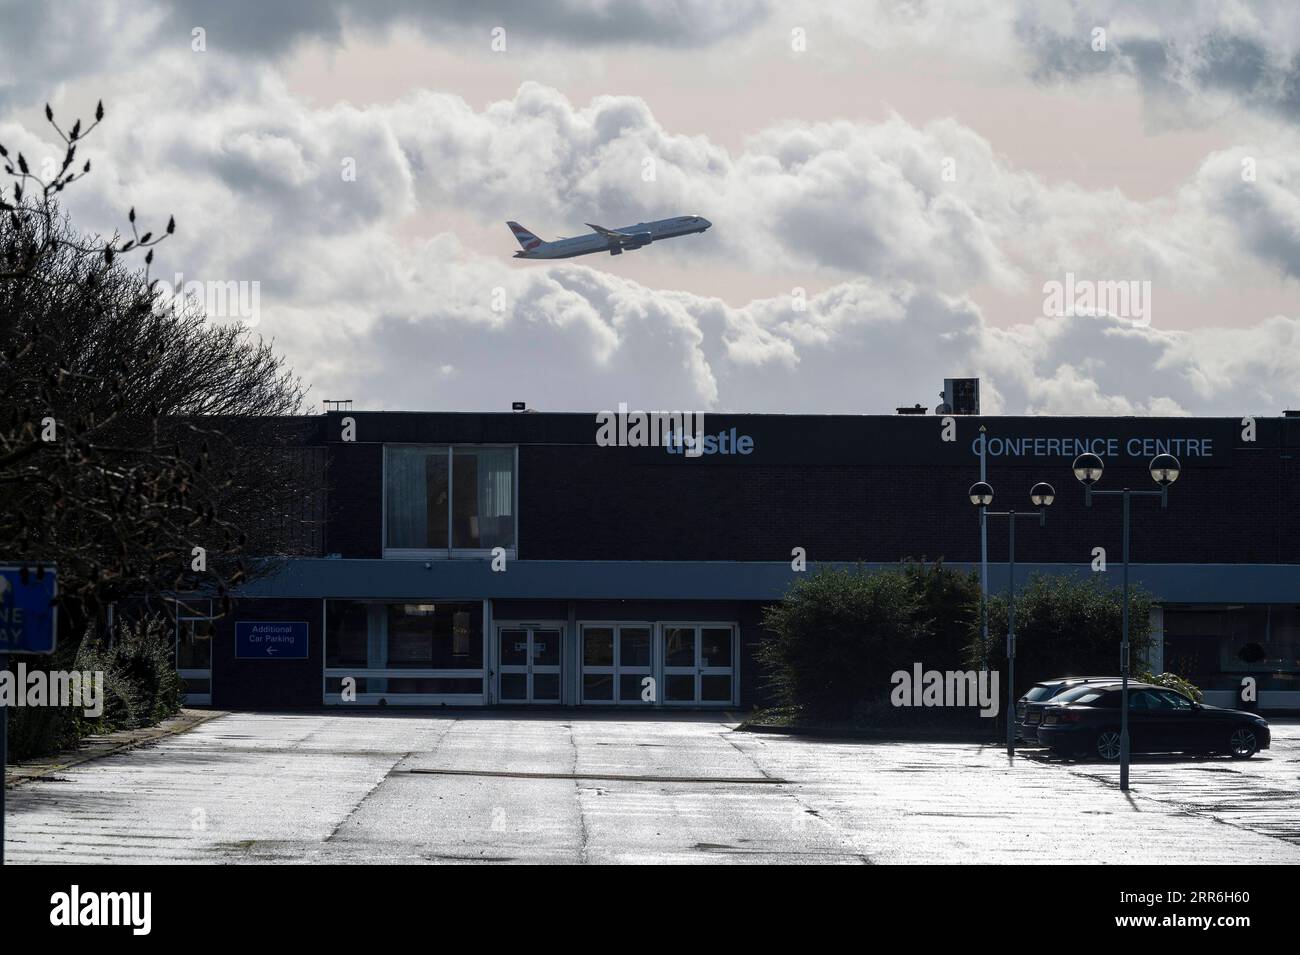 210216 -- LONDON, Feb. 16, 2021 -- An airplane flies over a hotel near Heathrow Airport in London, Britain, on Feb. 15, 2021. From Monday, all British and Irish citizens and British residents who arrive in England after being in the red list of more than 30 high-risk countries now have to self-isolate in hotels. The red list countries include South Africa, Portugal and South American nations. Photo by /Xinhua BRITAIN-LONDON-COVID-19-HOTEL QUARANTINE STAY RayxTang PUBLICATIONxNOTxINxCHN Stock Photo